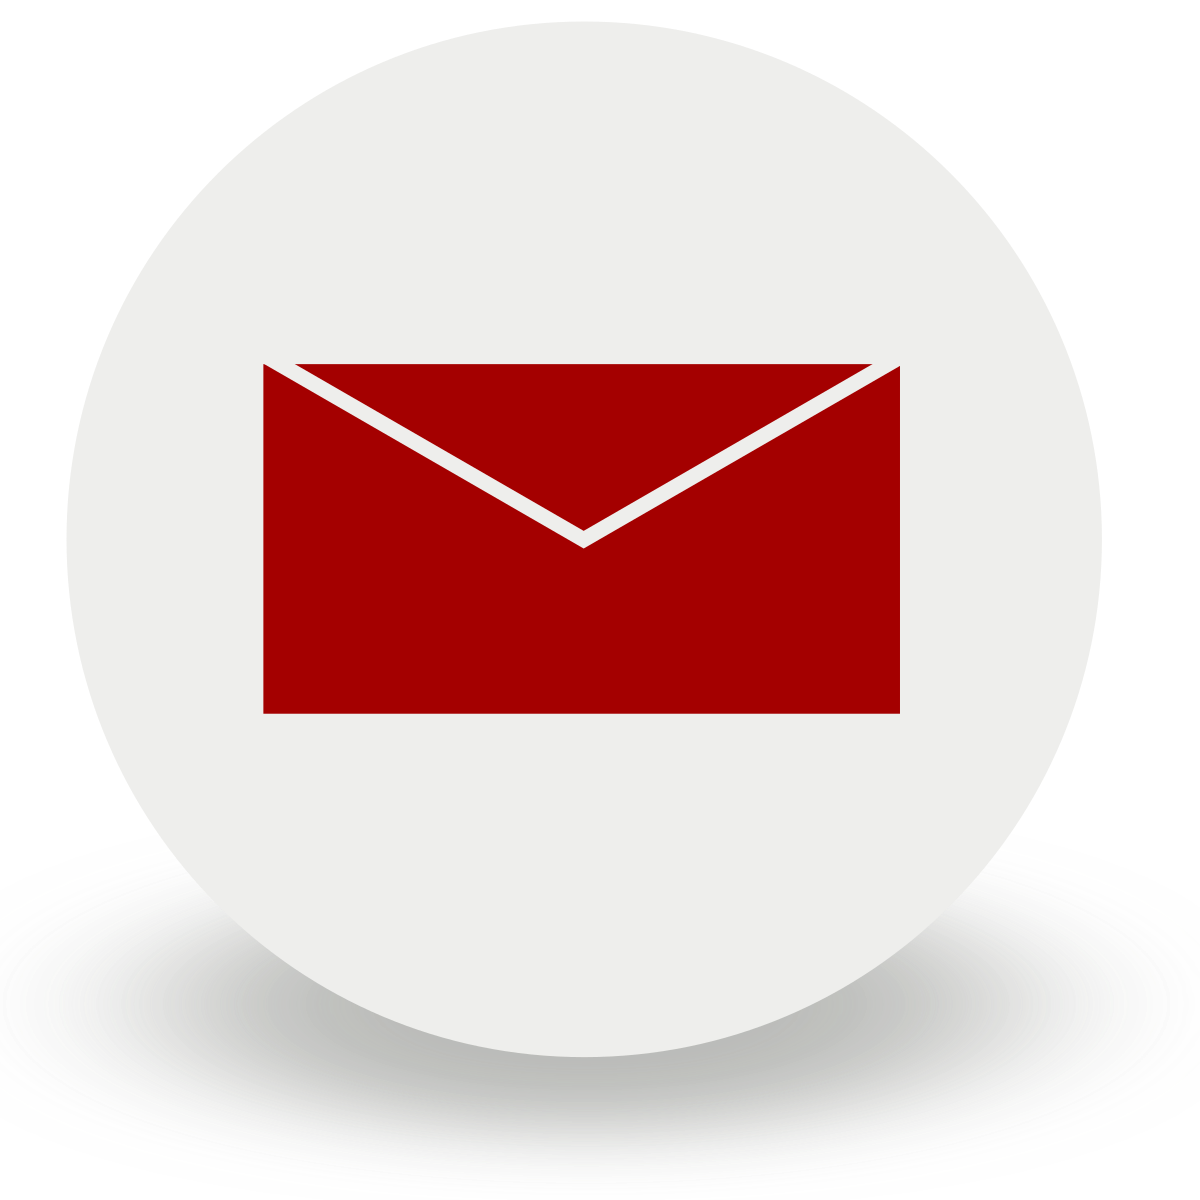 Download File:Email icon.svg - Wikipedia